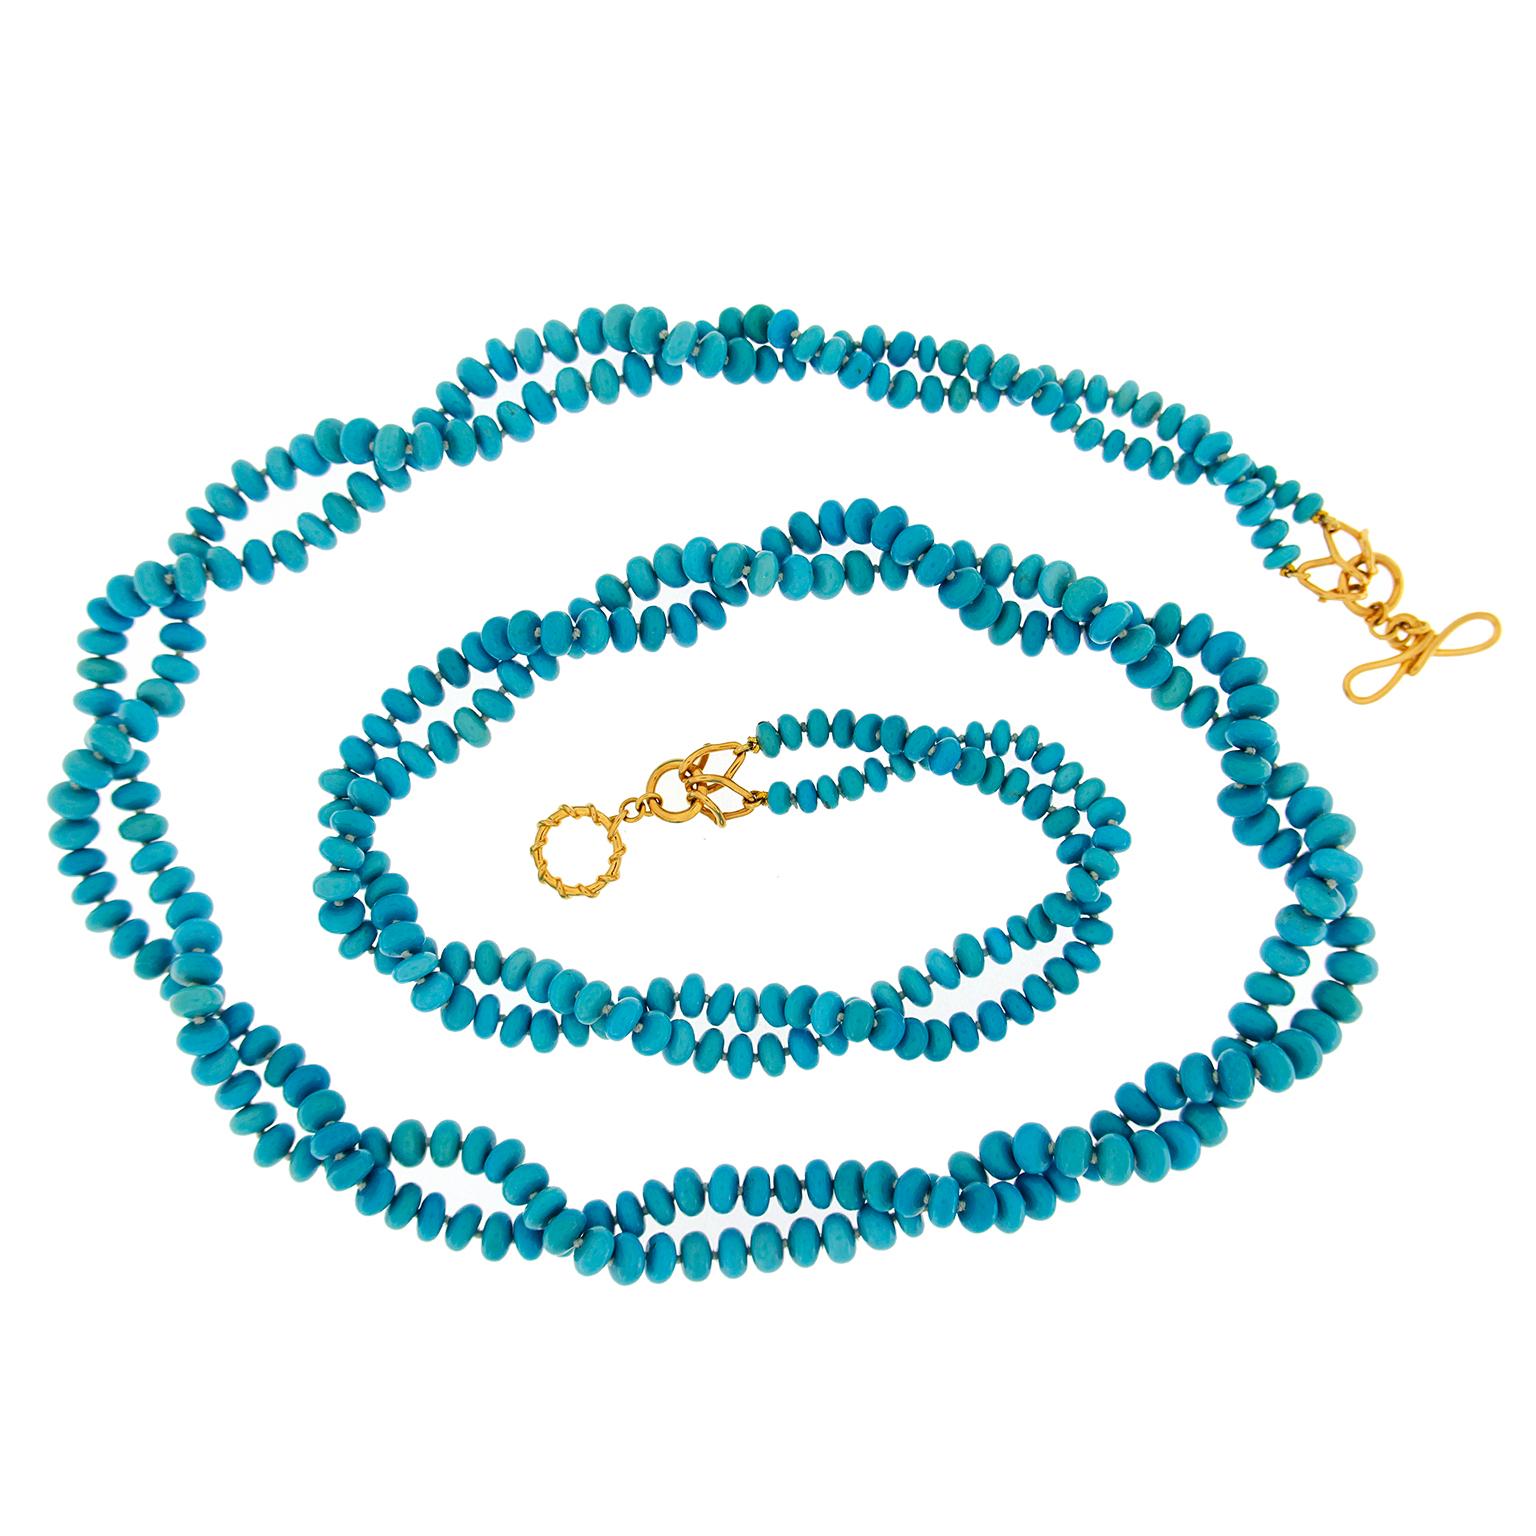 Two-Strand Turquoise Rondelle Necklace features an abundance of beads. It can be worn in many ways, from as-is to looping around the neck, creating a field of blue.  A wire wrapped 18k yellow gold ring-and-toggle clasp featuring interlocking Vs